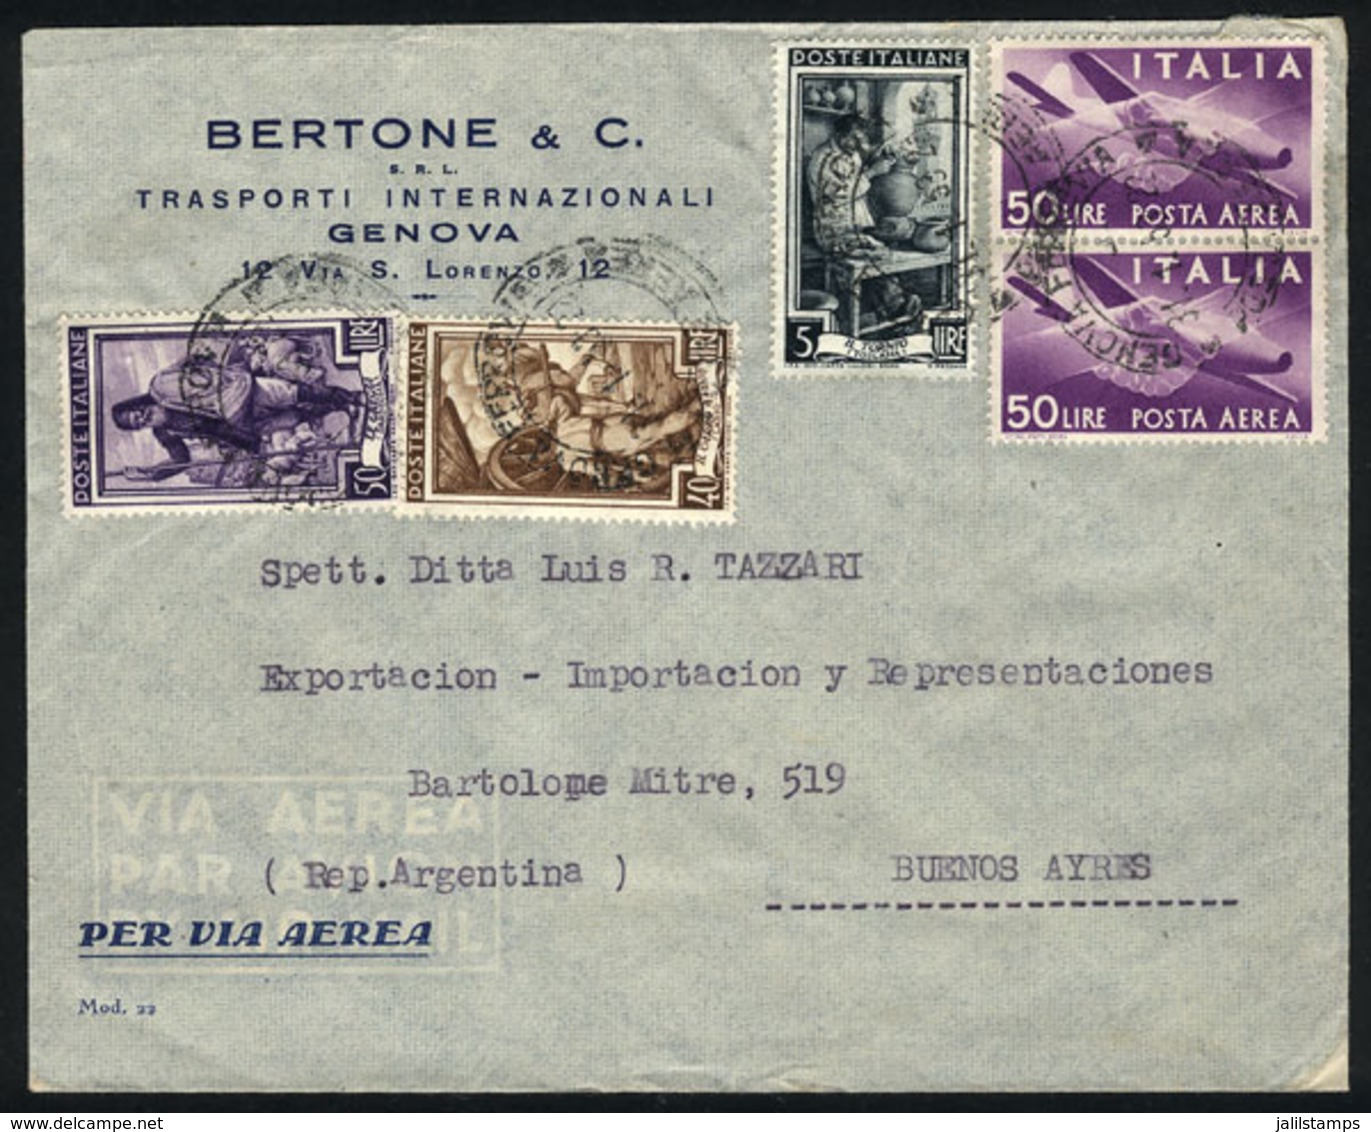 ITALY: Airmail Cover Sent From Genova To Argentina On 31/JA/1953, With Nice Postage Of 195L., VF Quality! - Unclassified